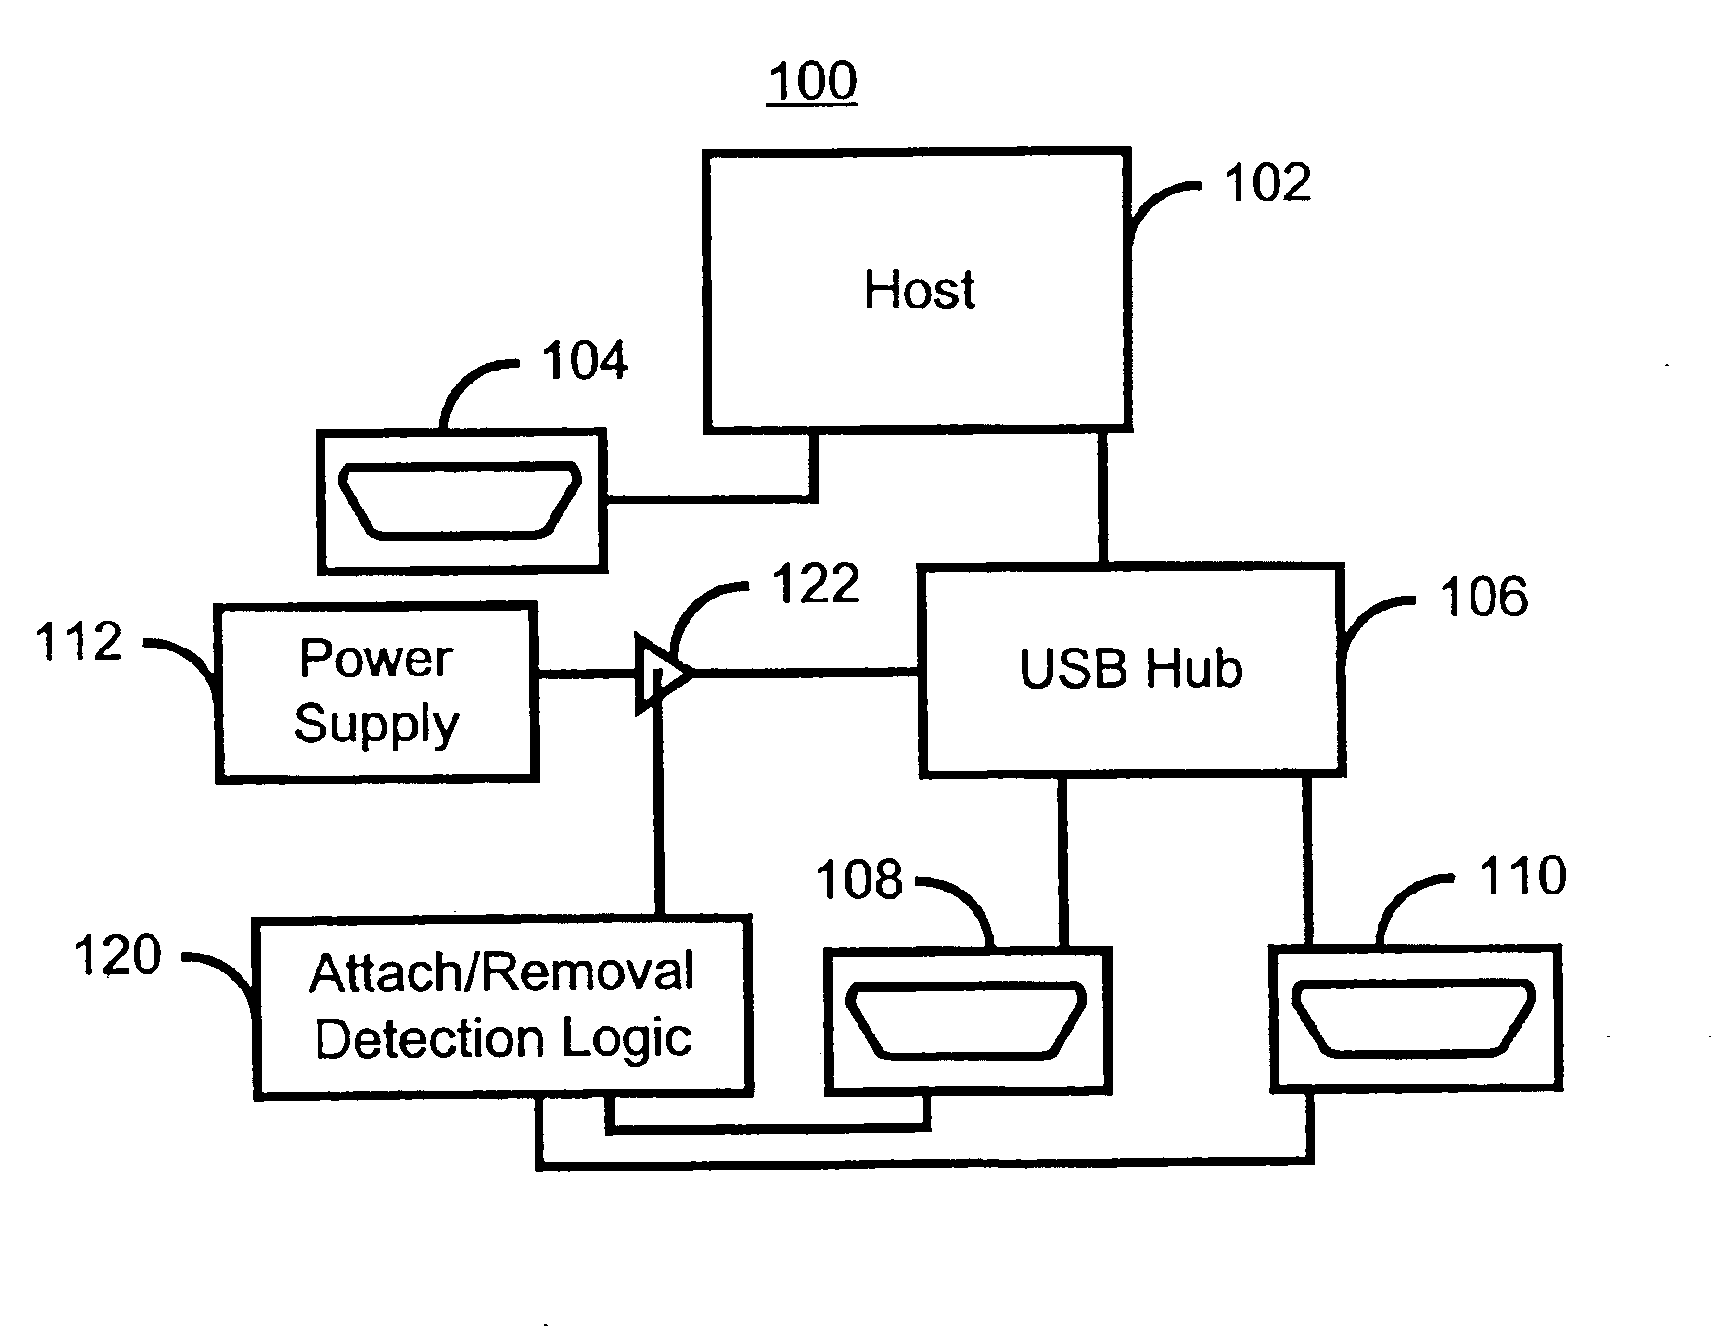 Method and system for managing power in a system having an internal USB HUB